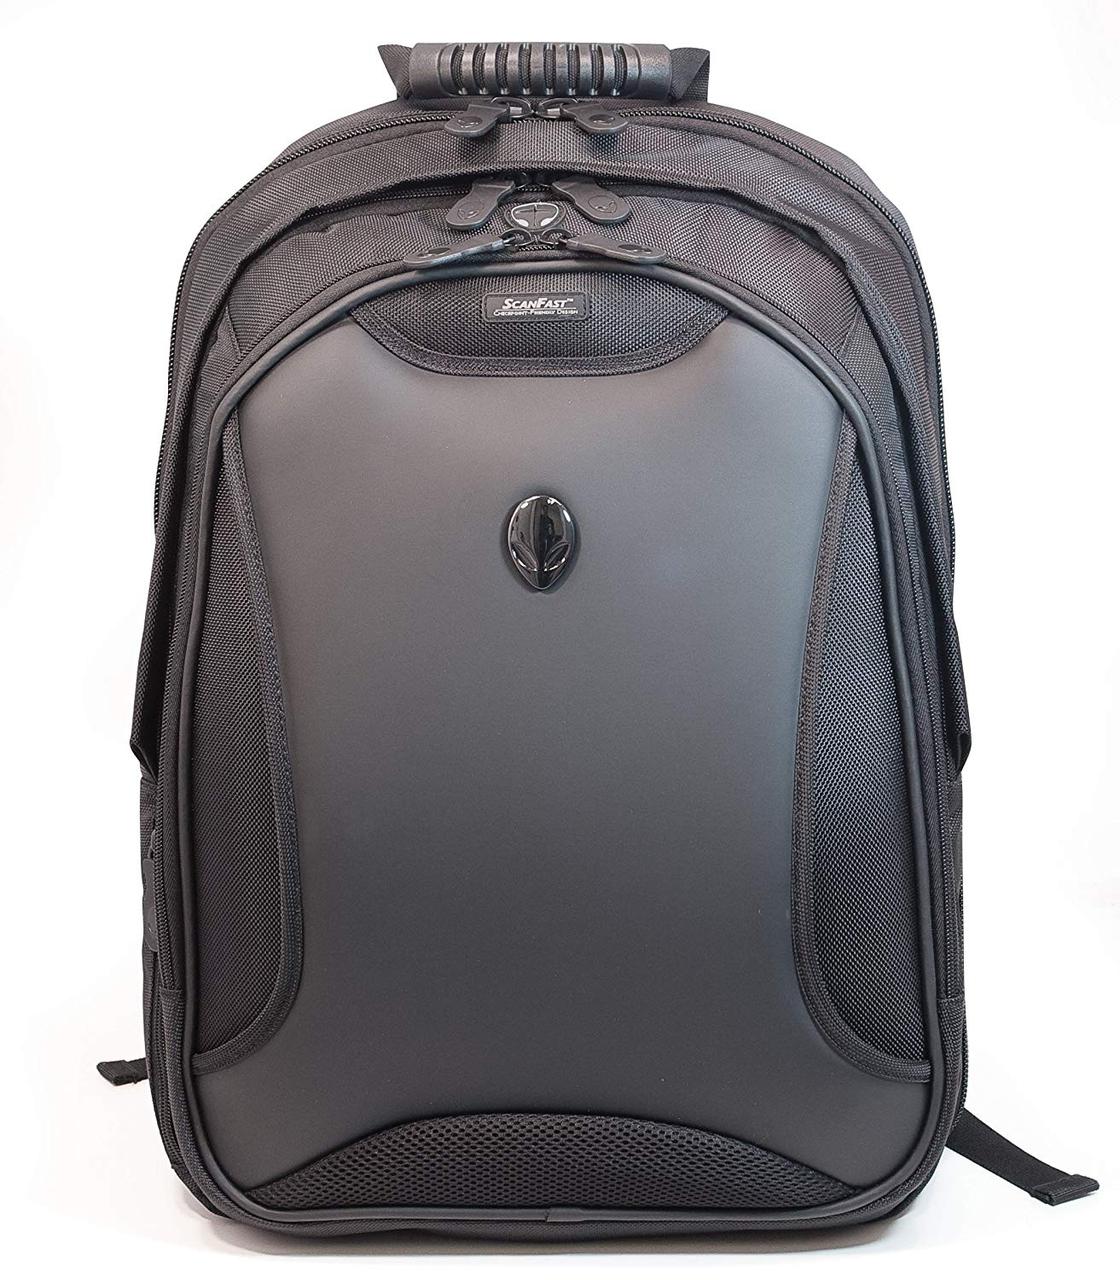 Рюкзак Mobile Edge Alienware Orion M17x ScanFast Checkpoint Friendly Backpack 17"